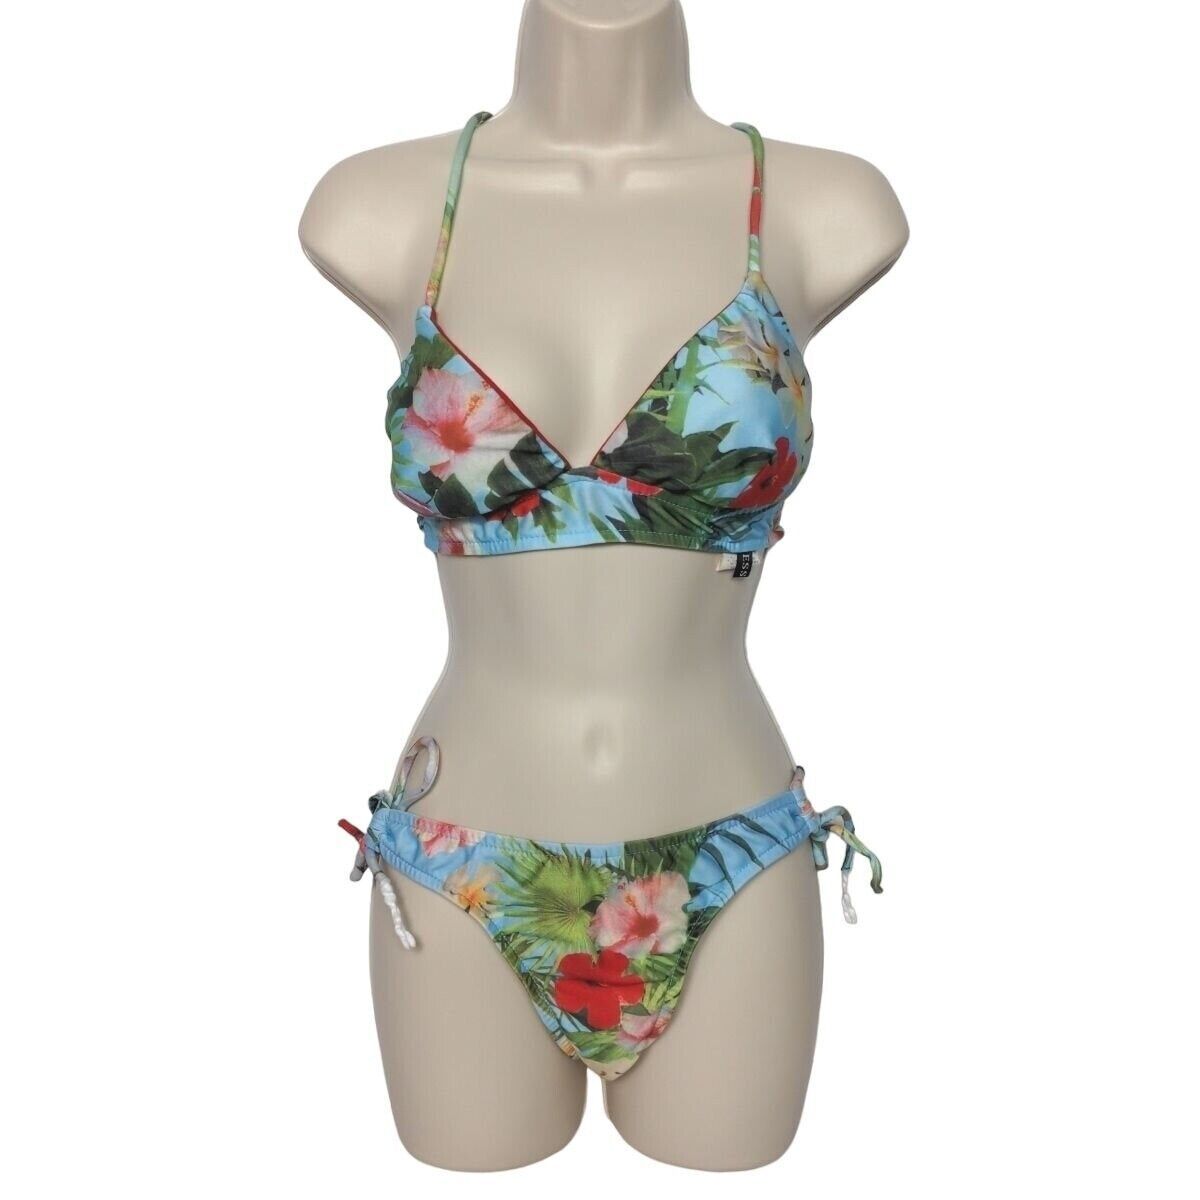 Primary image for Guess Halter Bikini Swimsuit Set Multicolor Floral Top Medium Bottom XS